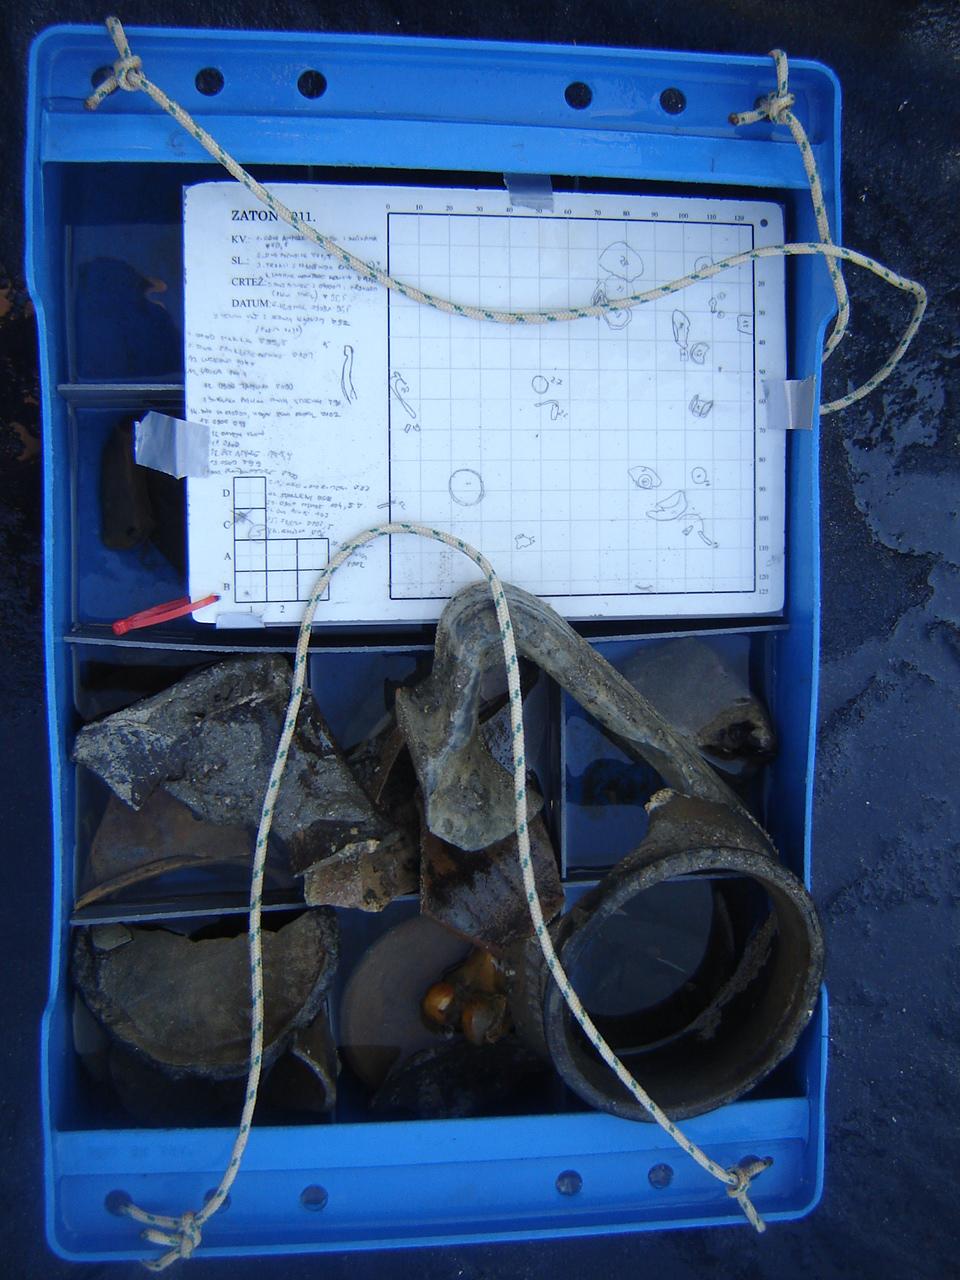 Recovering a tray of finds with the associated recording slate